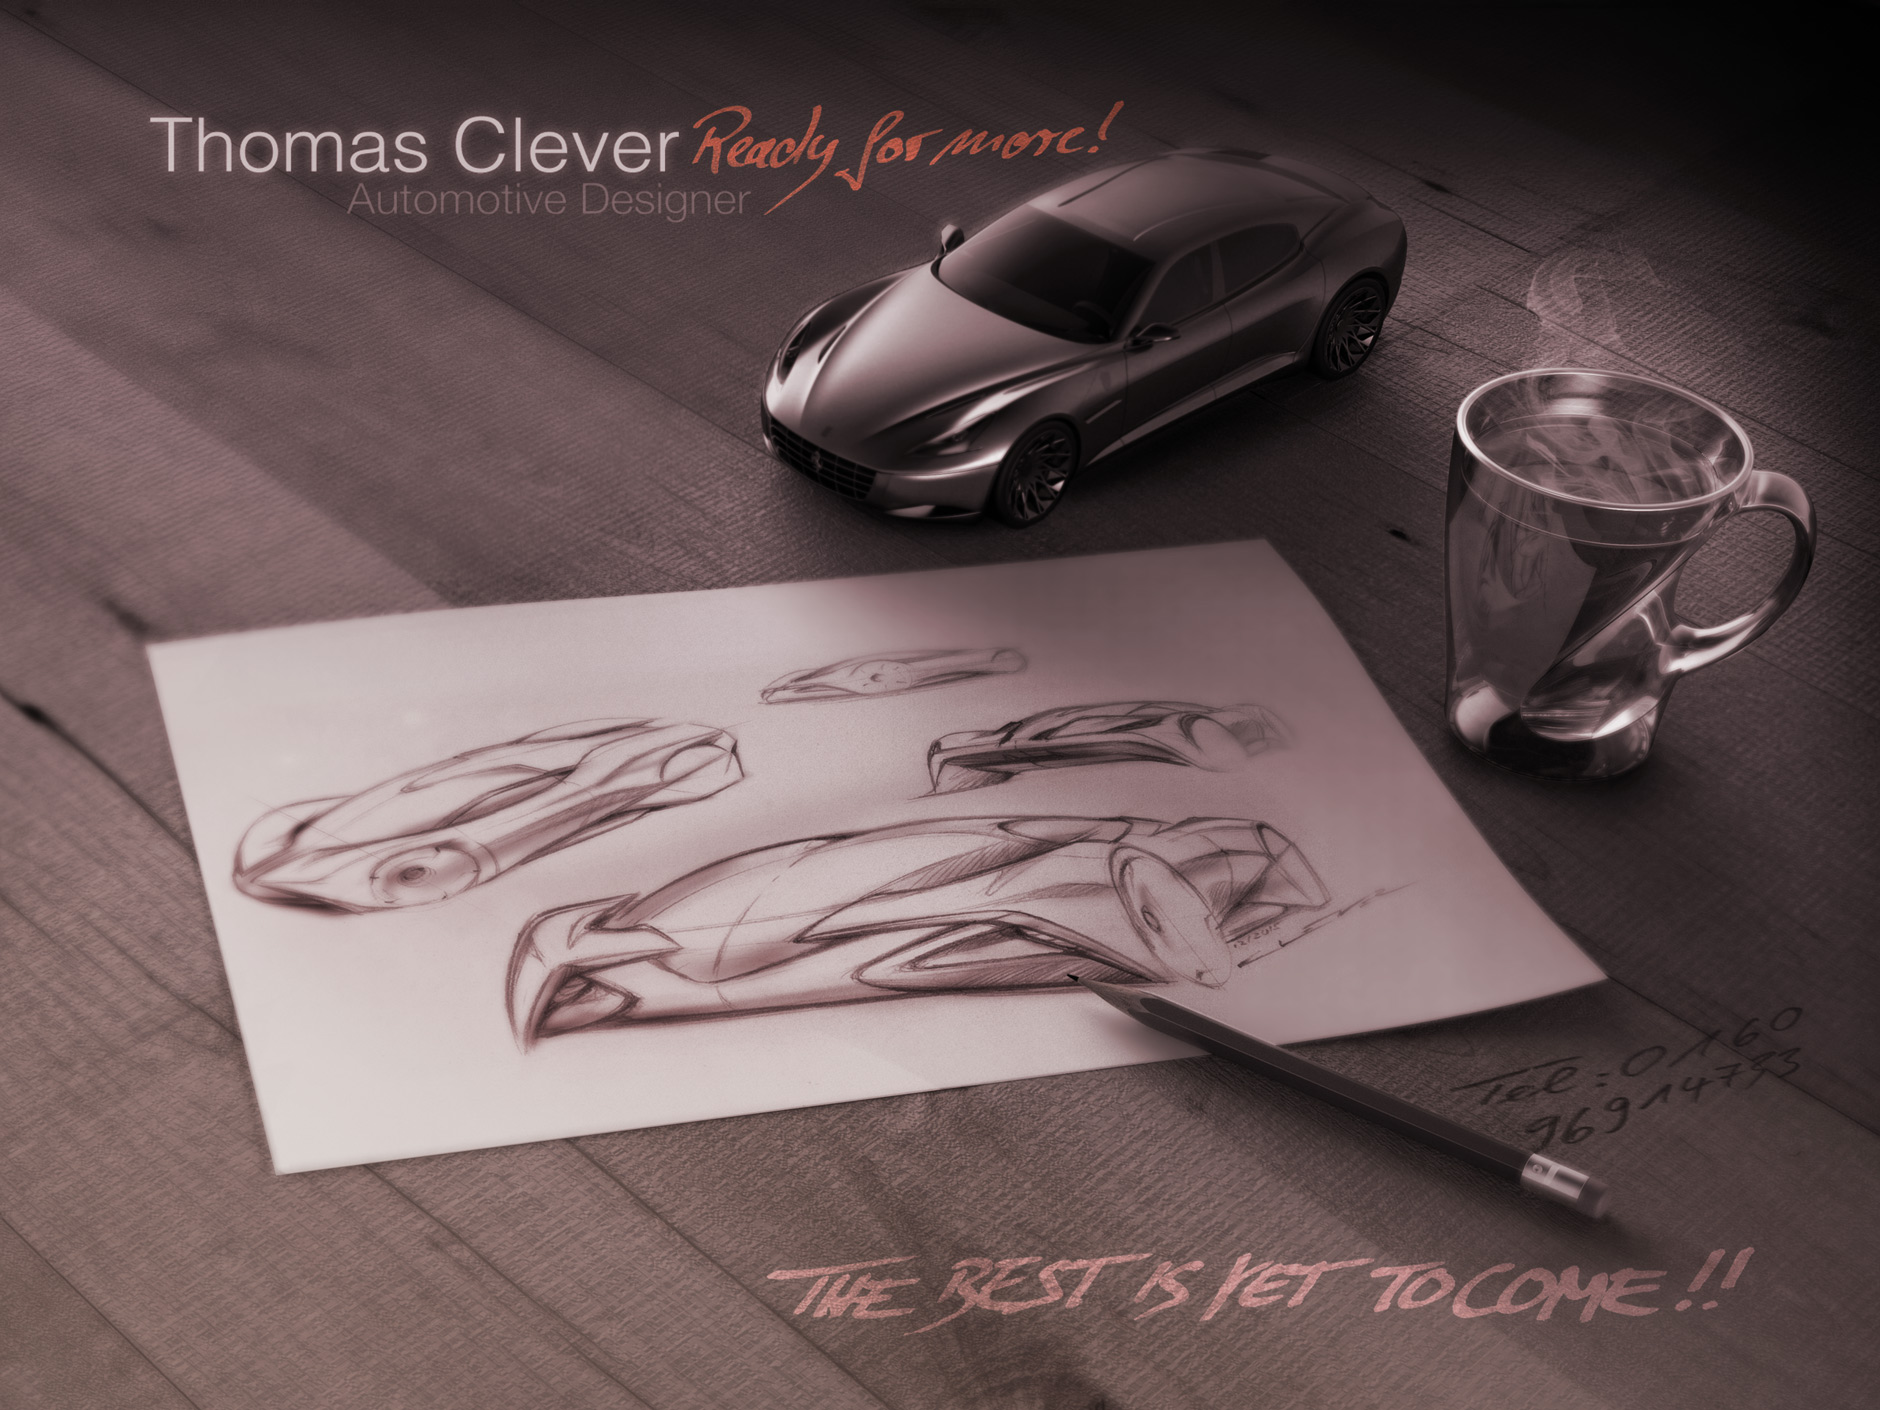 ThomasCleverDesign_Sketch_Table18a